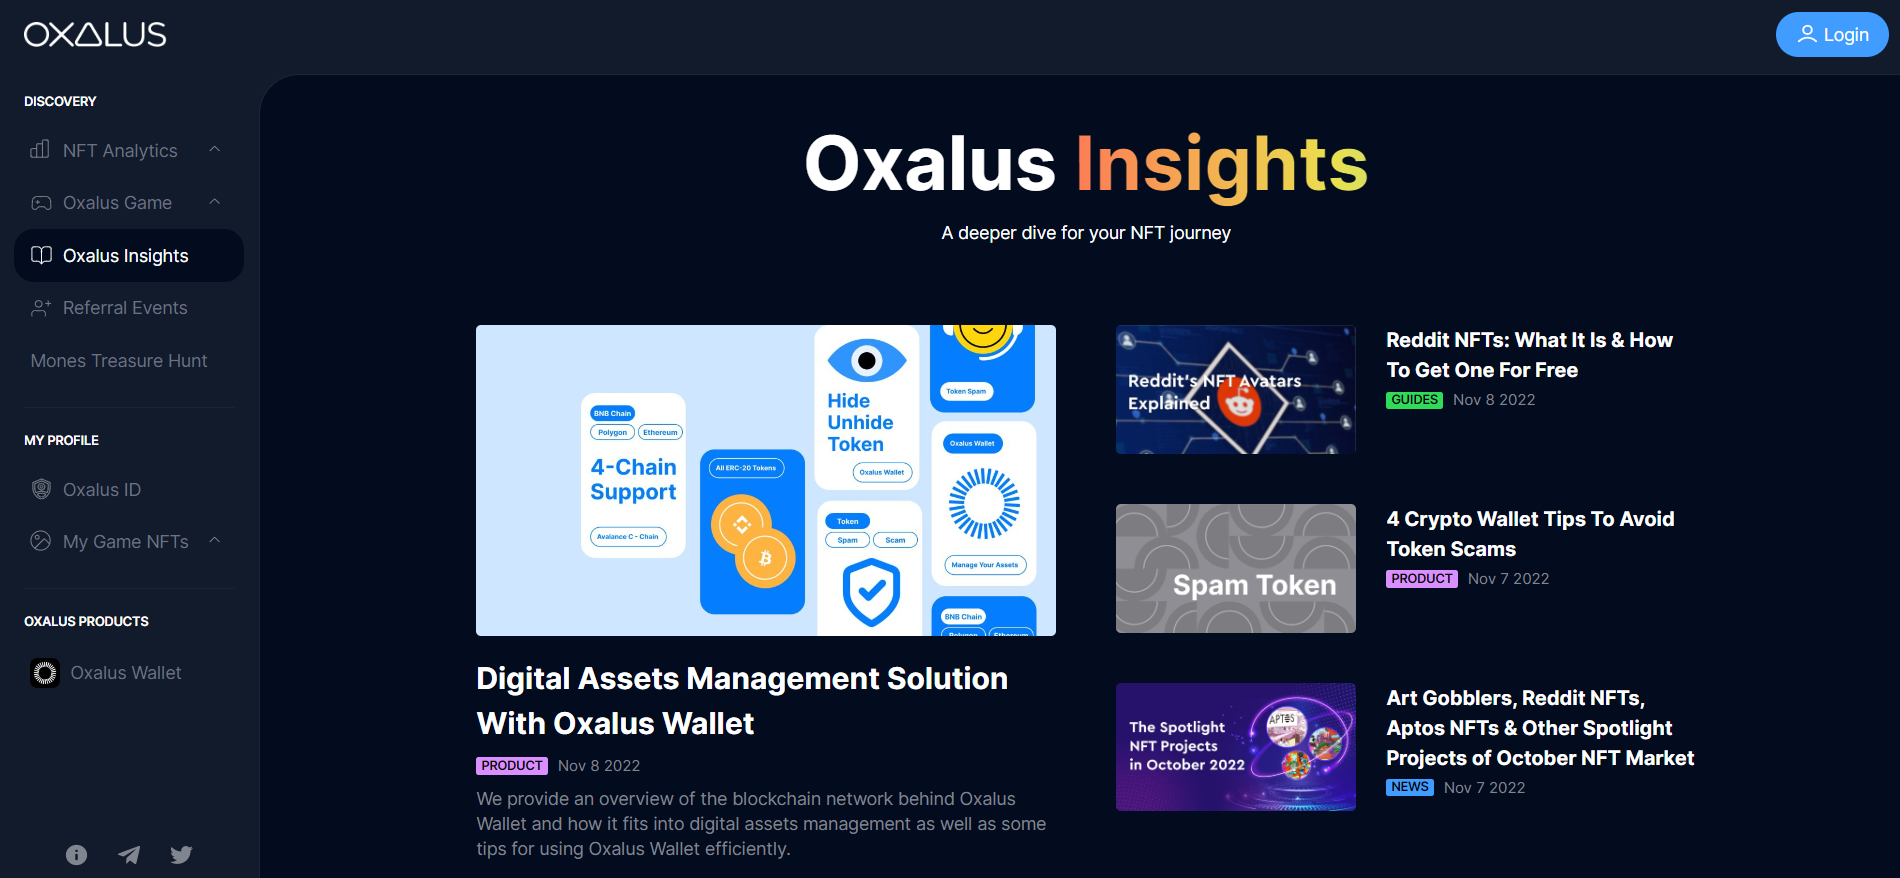 Oxalus - How To Find Upcoming NFT Projects